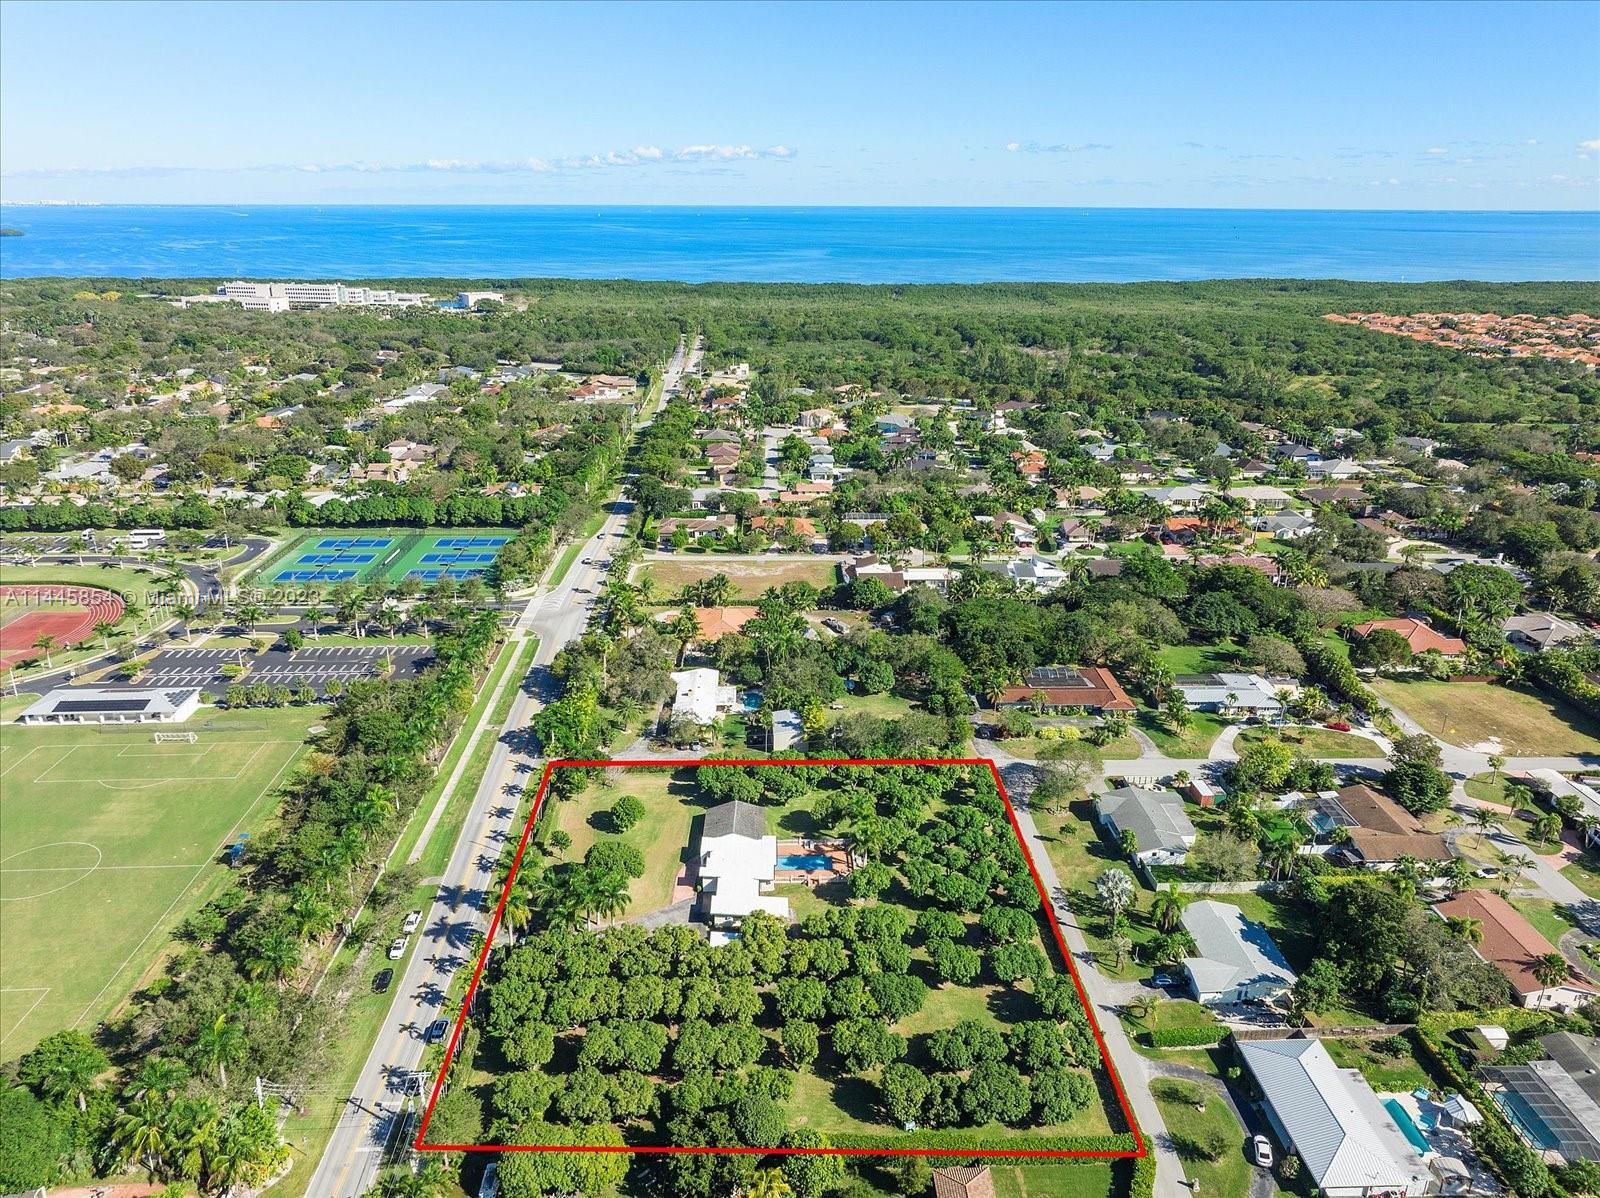 Rare opportunity to own a highly desirable location with an oversized 2.28 acre lot in Cutler Bay. Close to Old
Cutler Rd & minutes from Palmer Trinity School. Opportunity to make new construction or subdivide it for more
opportunities! Home has agricultural tax credit, meaning very low annual taxes. Abundant 100+ fruit trees. Main home is 2,635 sqft featuring 4bds/3bath at one end & kitchen, living space & den on the other. The large 36x20 pool is surrounded by a concrete pad, perfect for family gatherings. Adjoined to the home by the 2 car carport is an office with a full bath & gym space. This could easily become a guest home or rental. Last structure is a workshop & a pump house for well water. Home connected to a septic tank. This is a rare & unique opportunity that will not last!